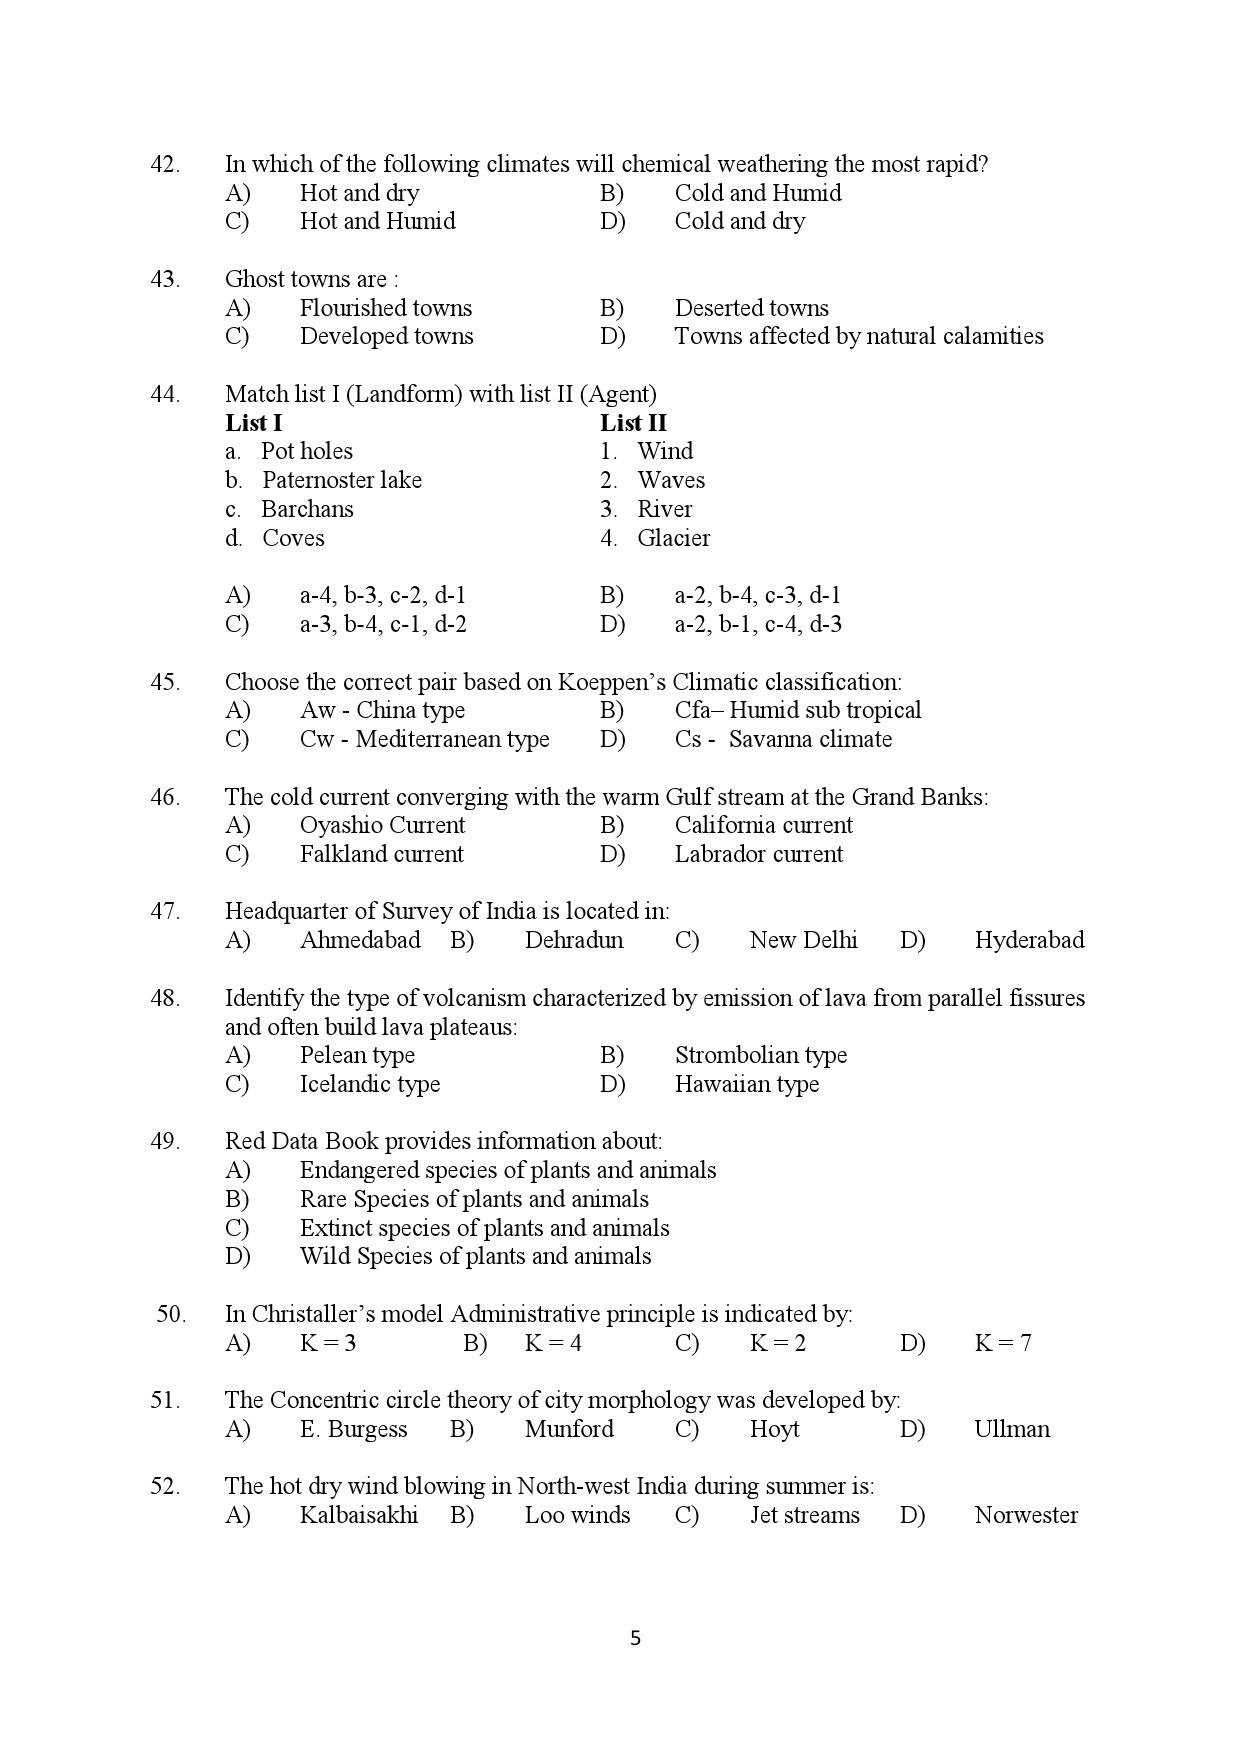 Kerala SET Geography Exam Question Paper February 2020 5